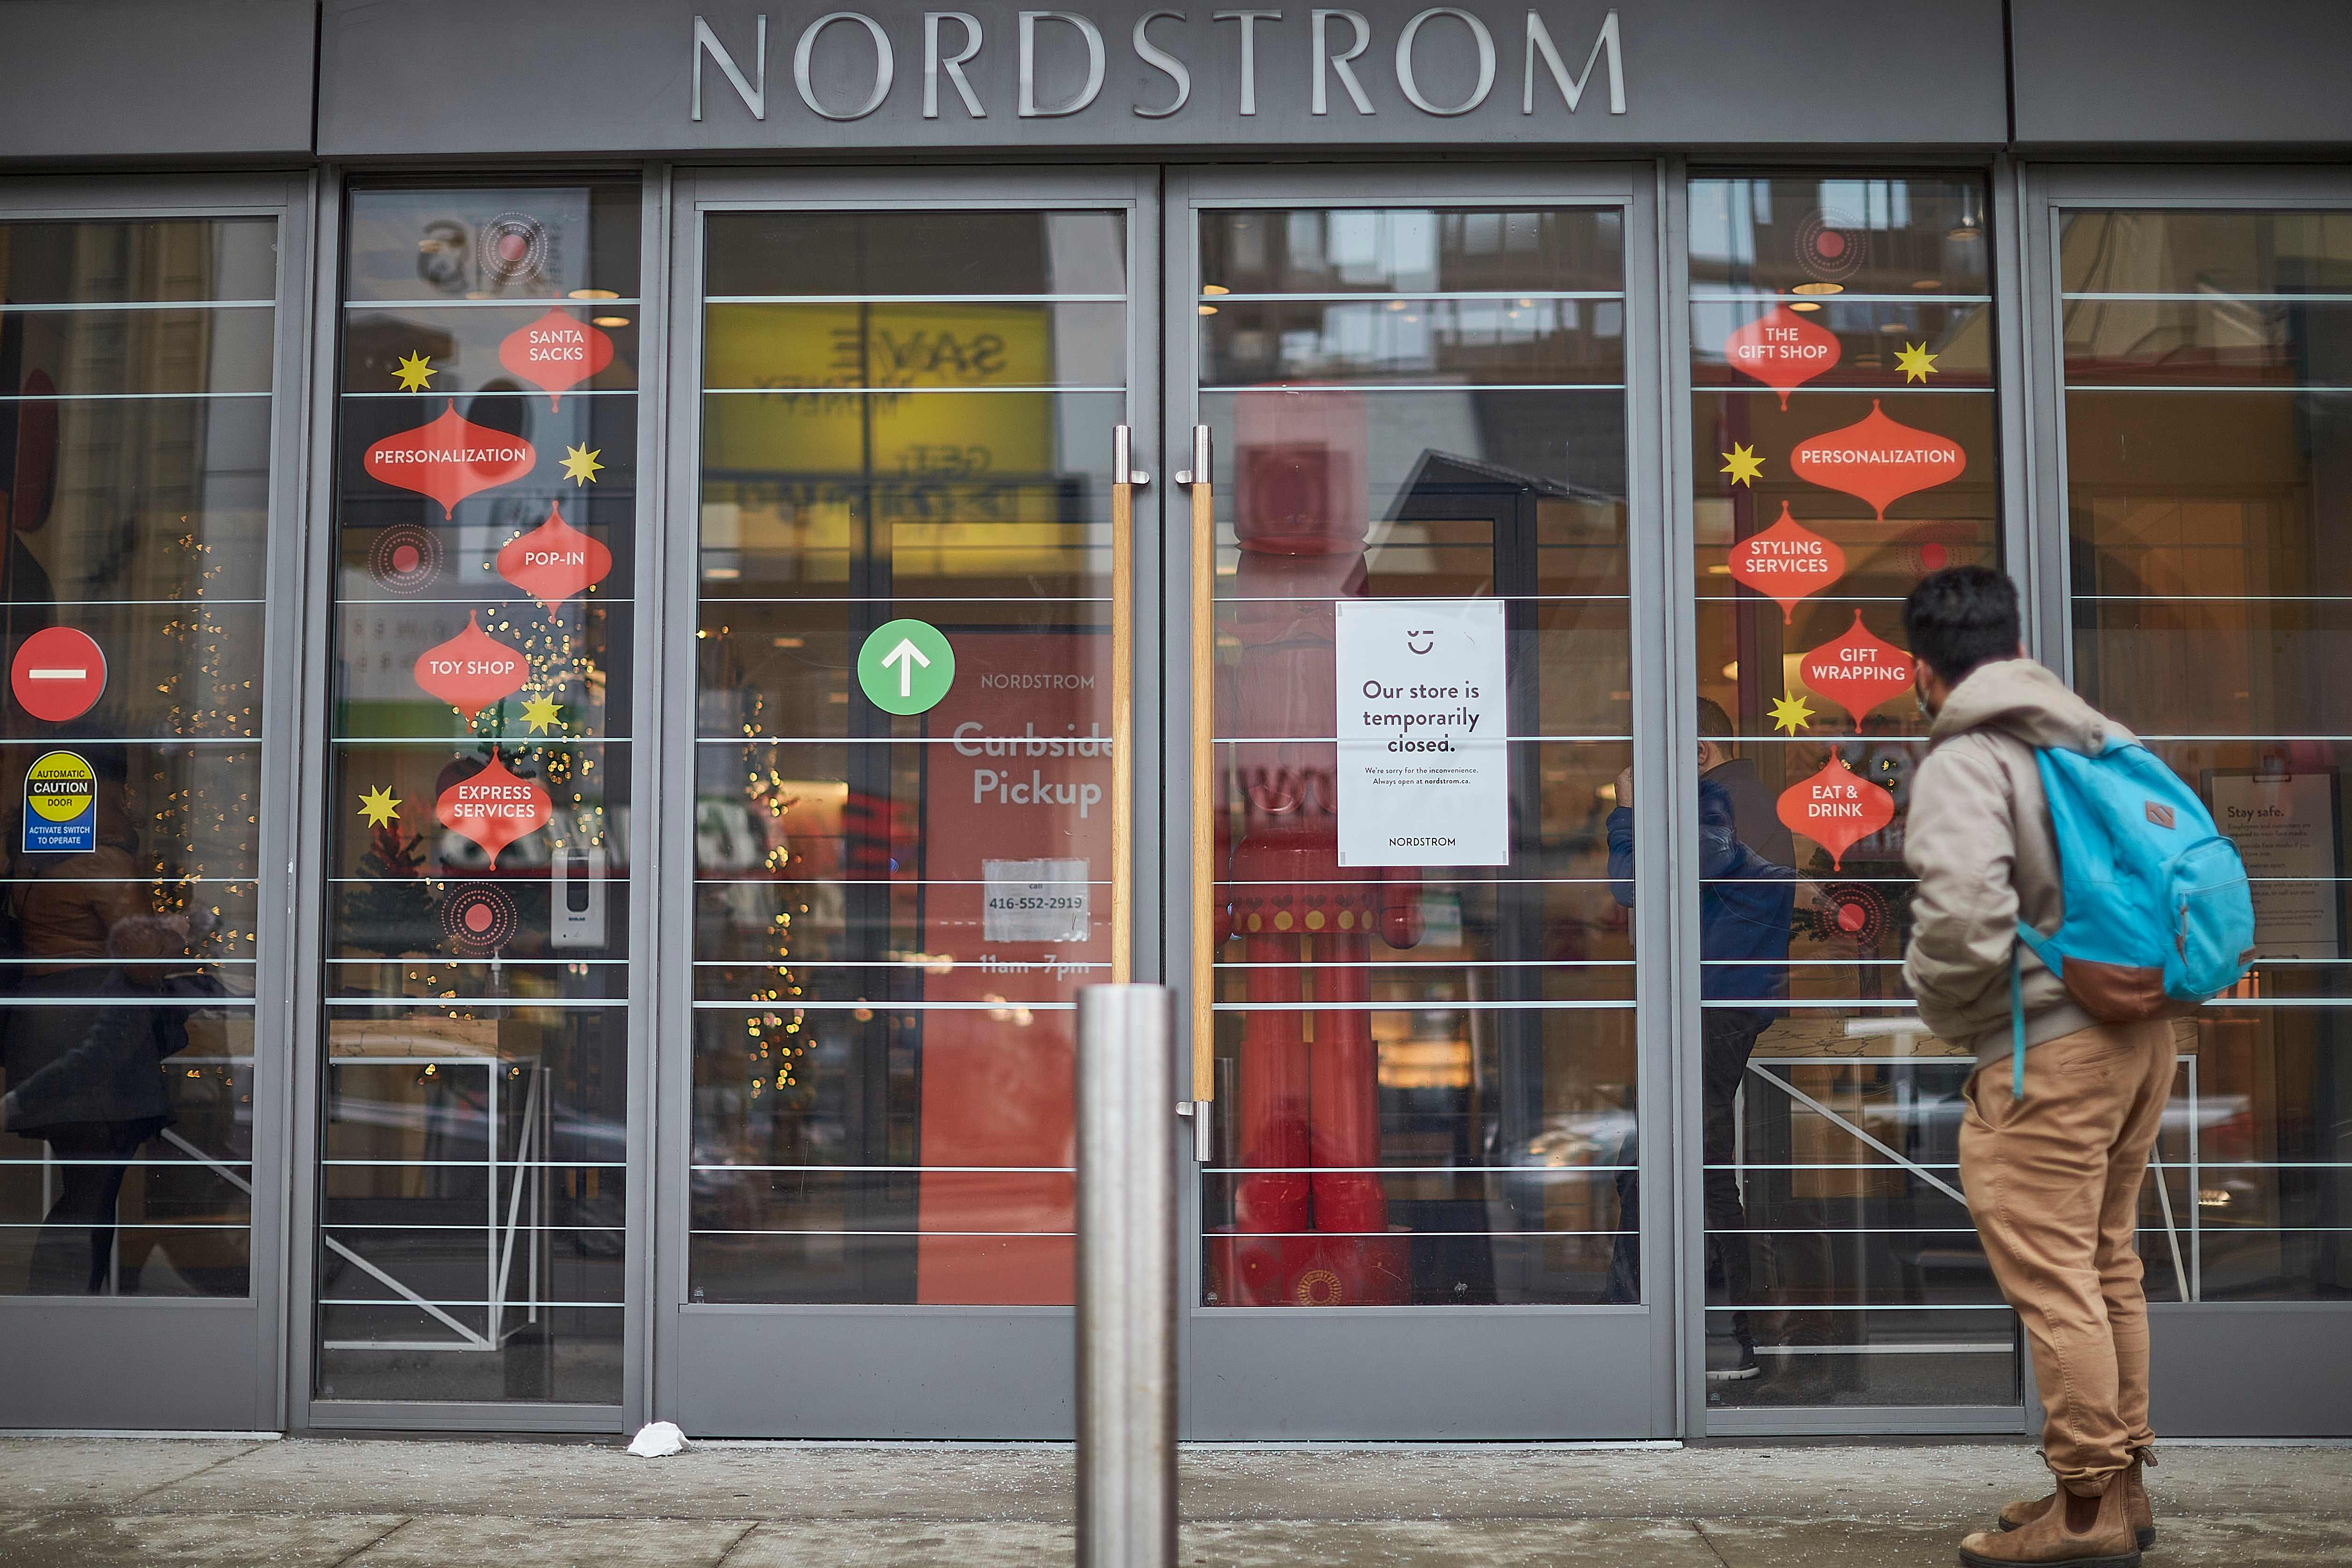 Nordstrom Closes Stores Across the U.S. and Canada over COVID-19